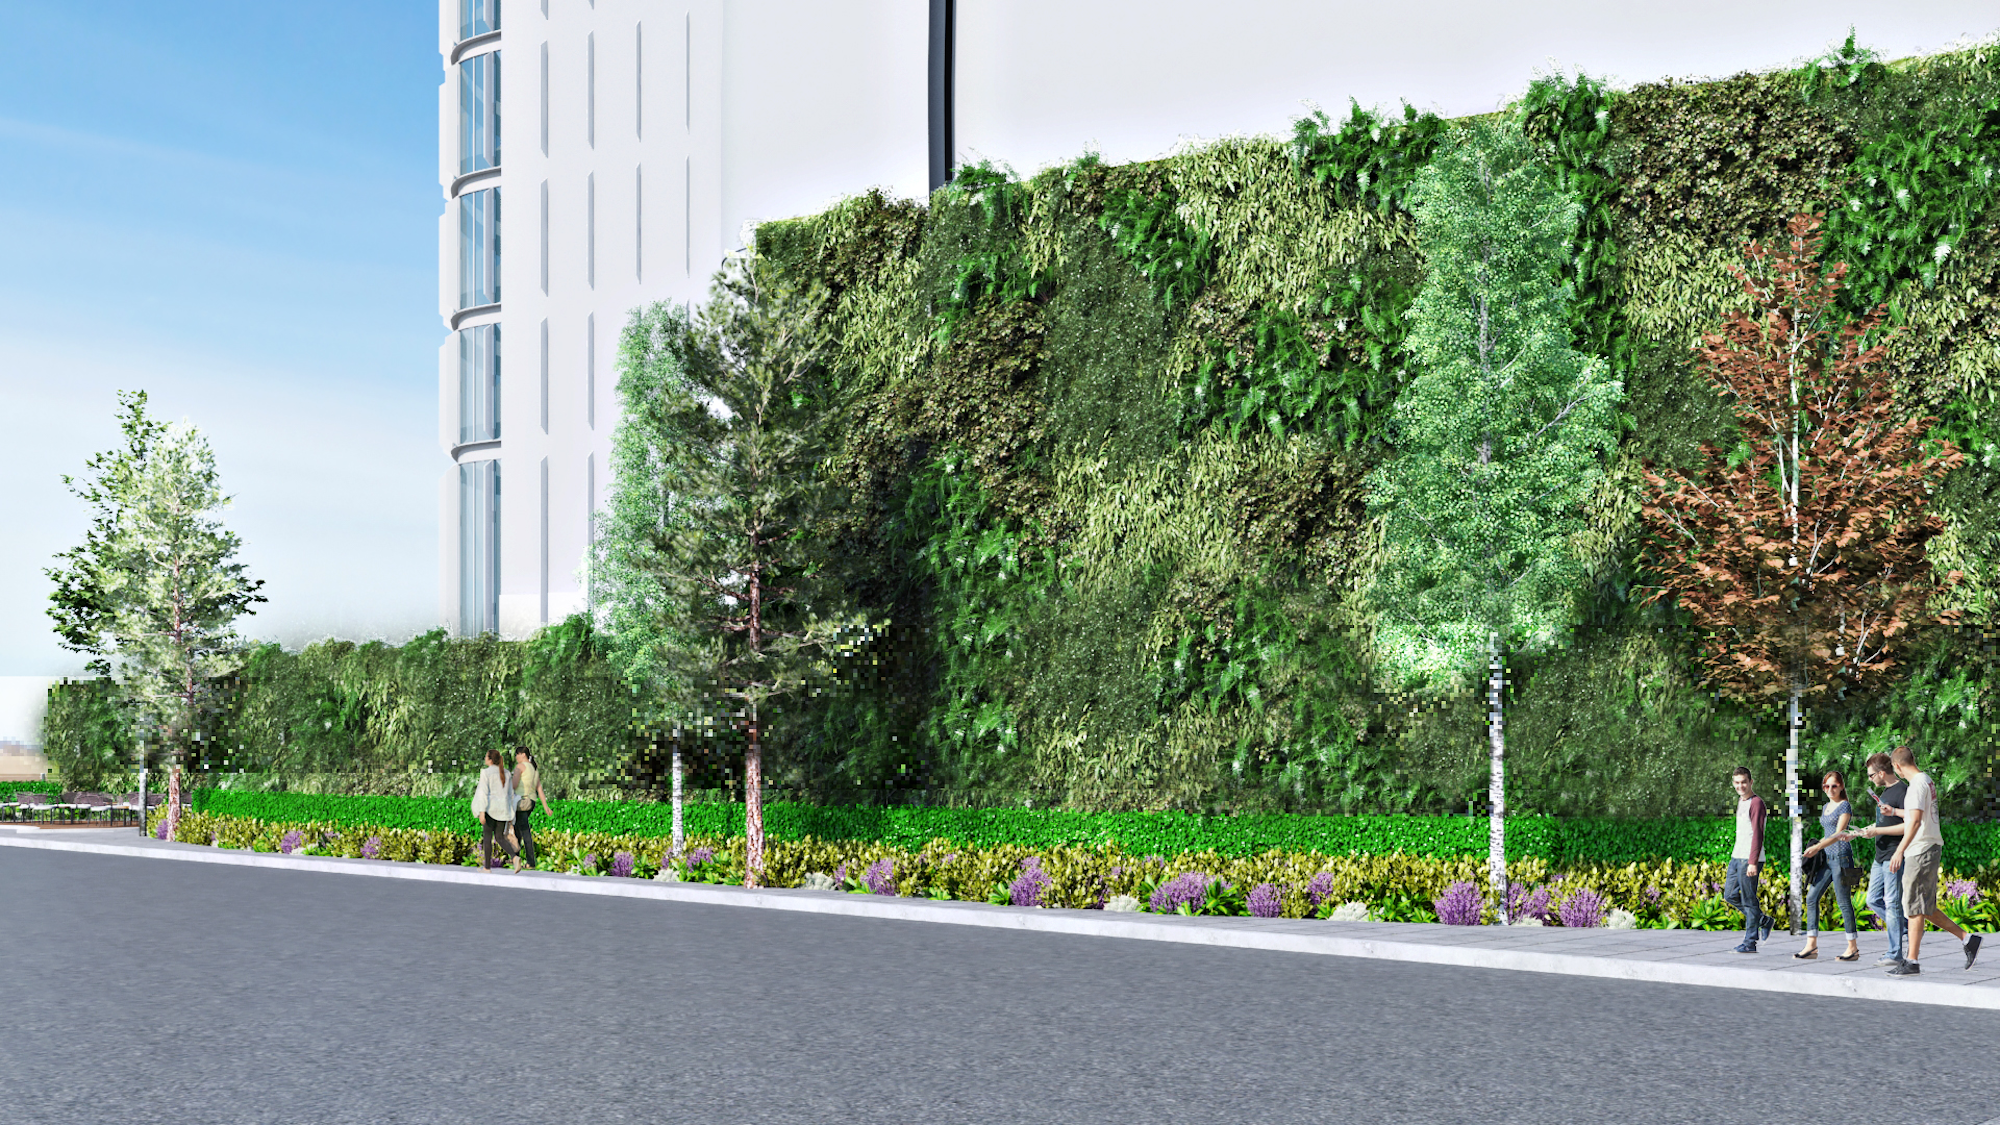 3D render of a pavement and commercial building with green walls trees and ground planting or landscaping